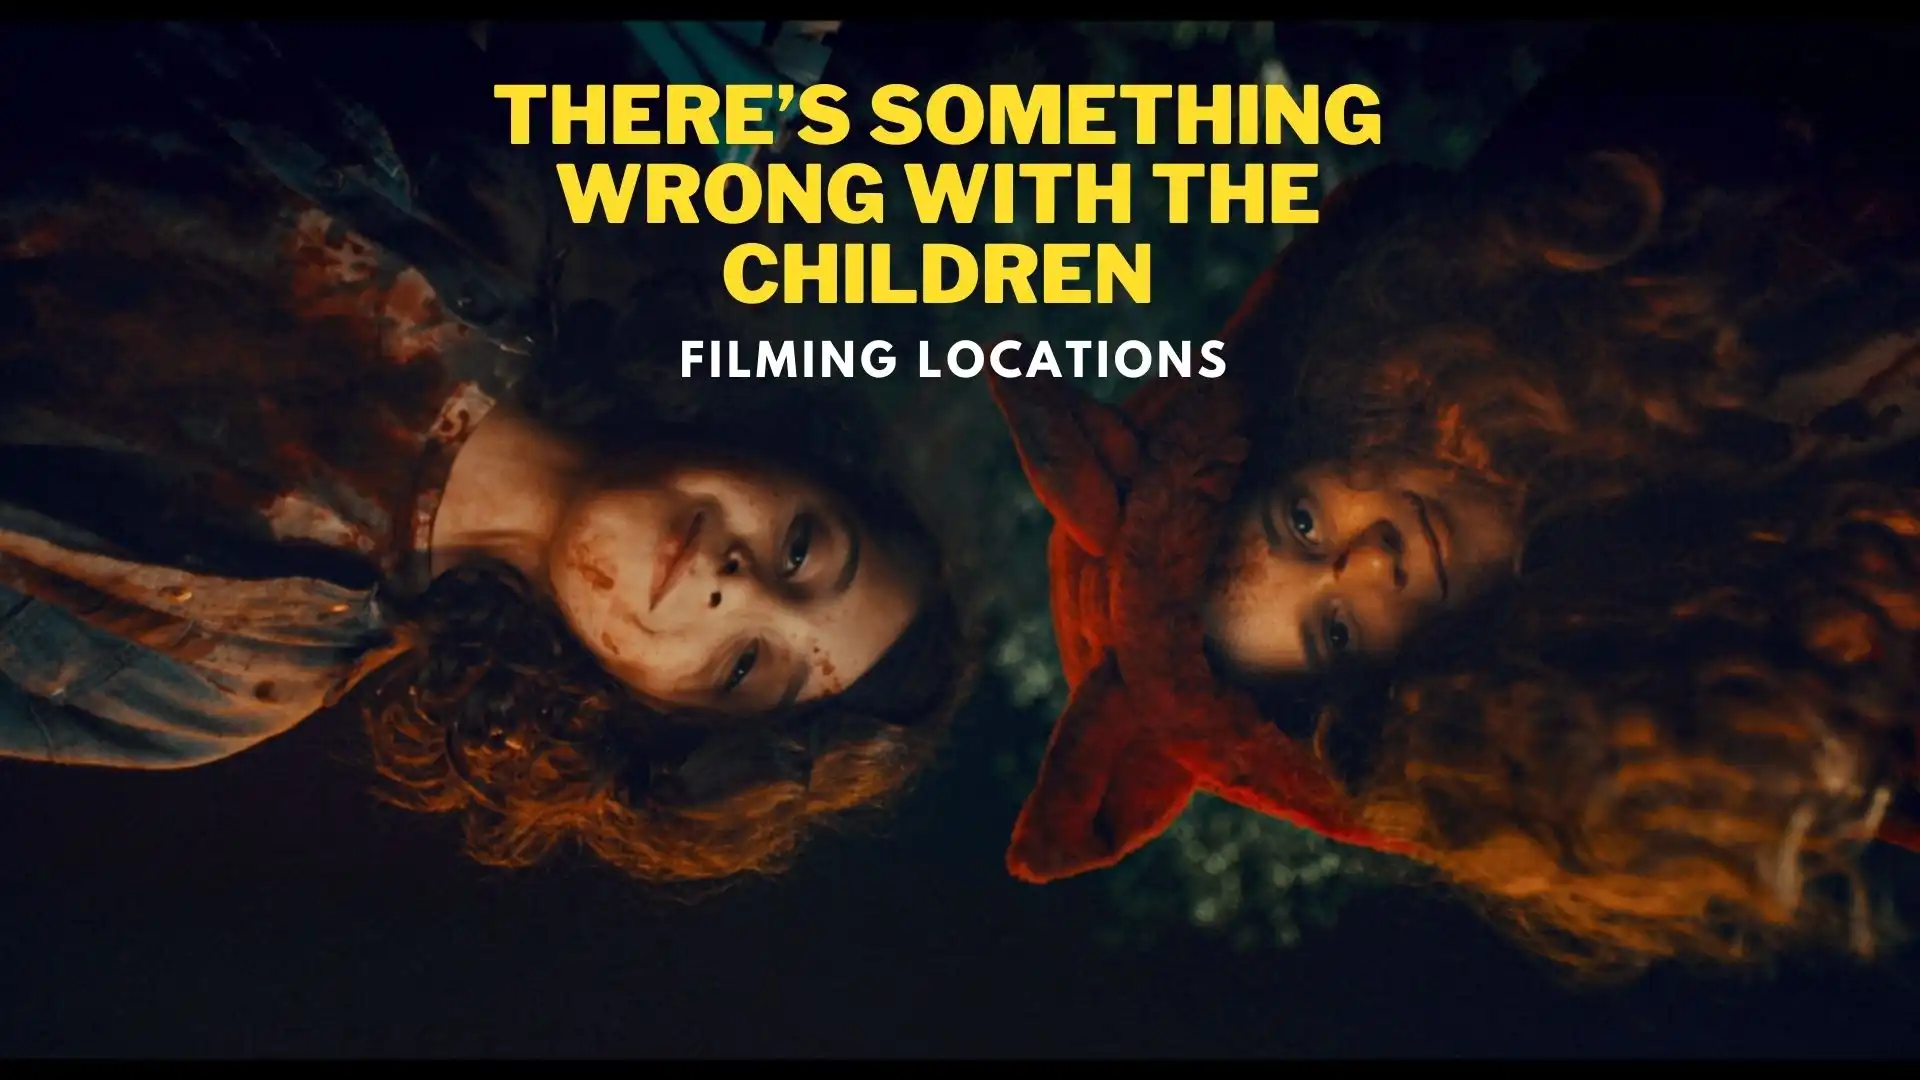 There’s Something Wrong with the Children Filming Locations